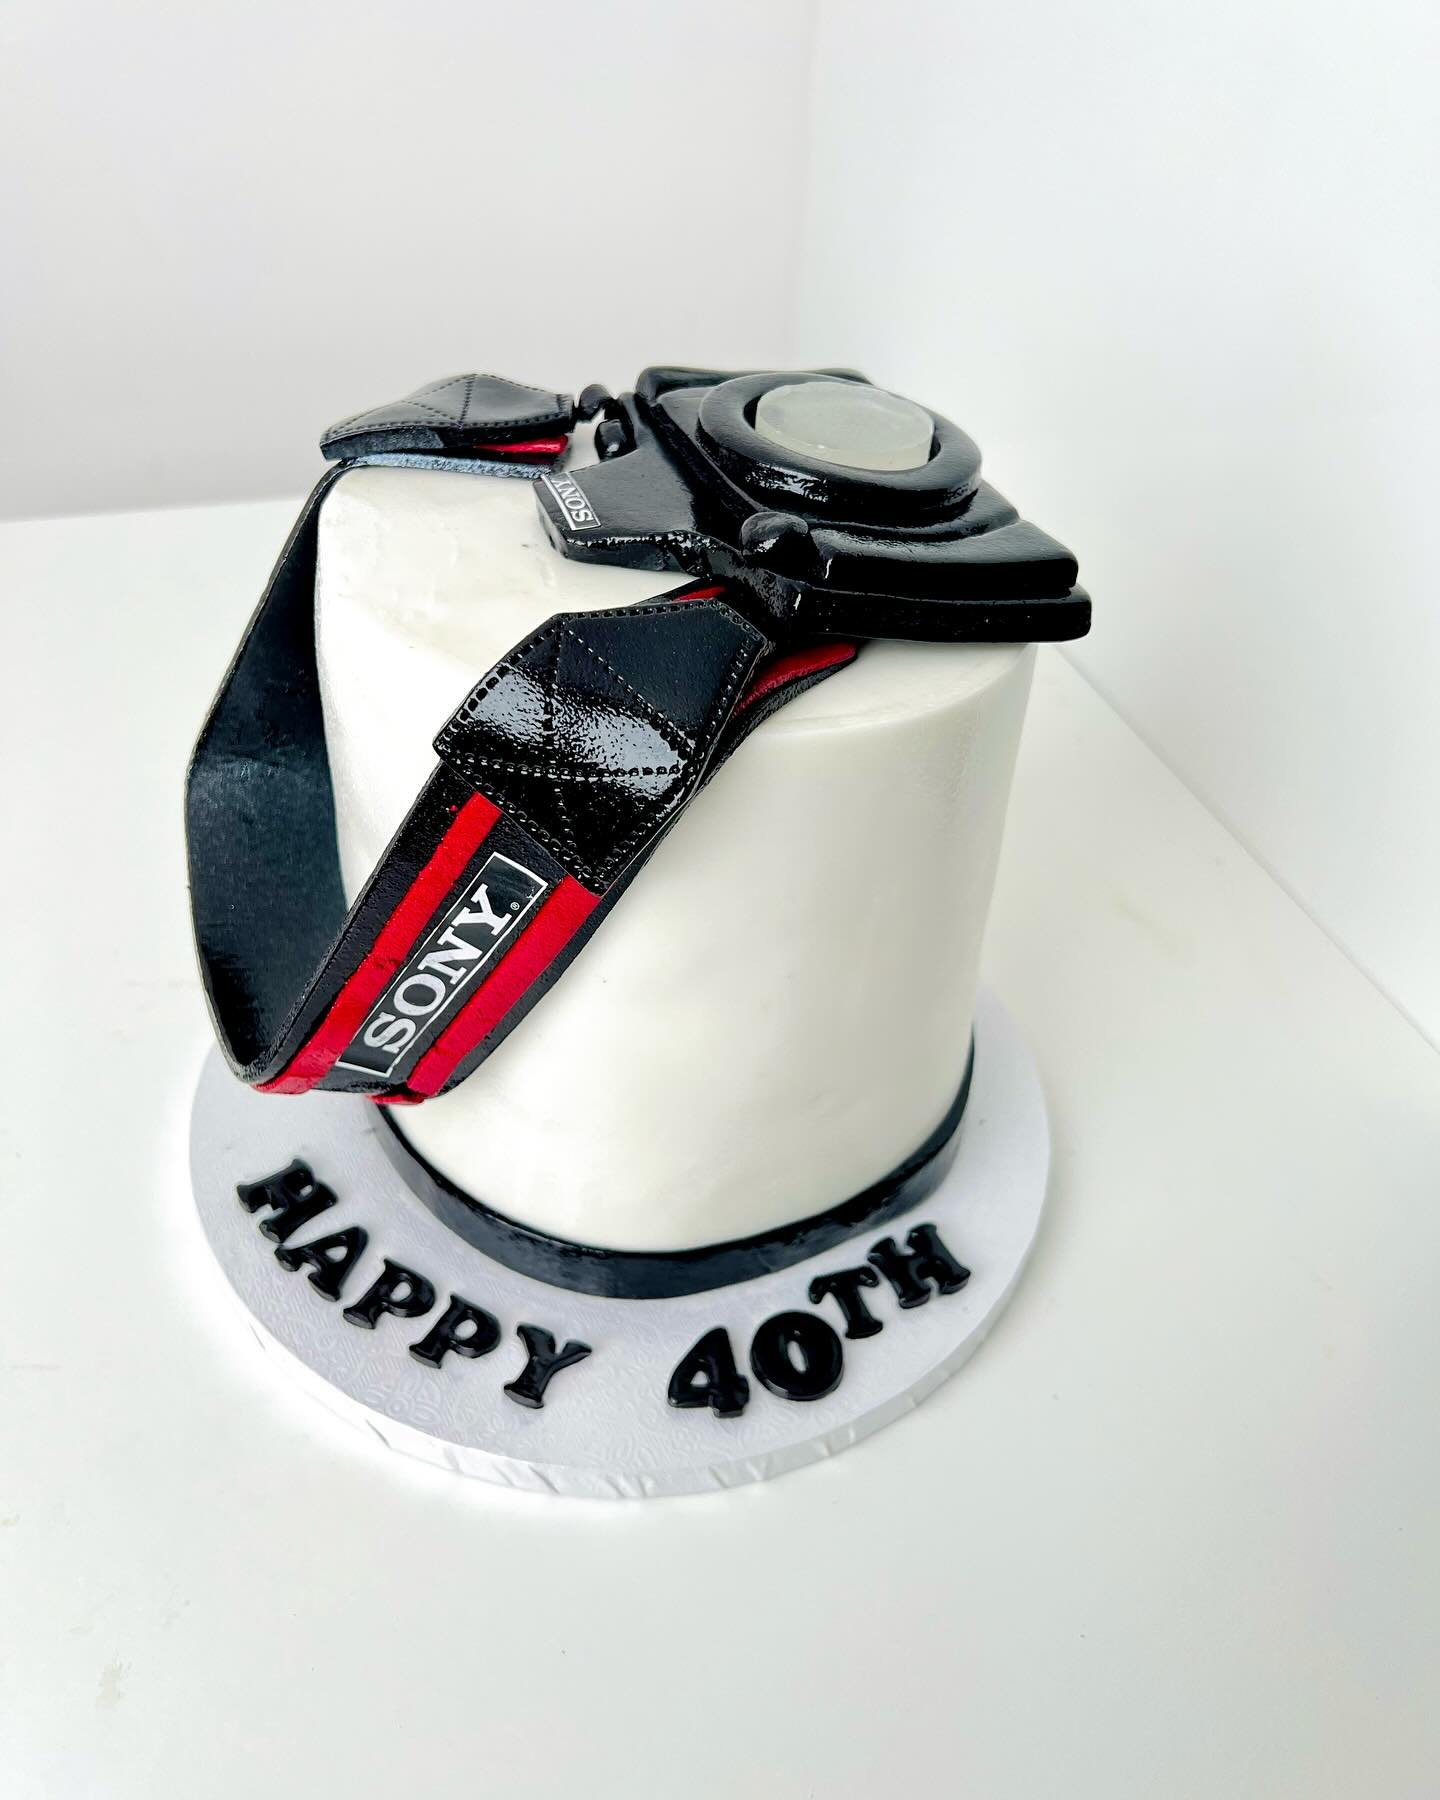 Mini Camera themed cake as requested by my client.
She wanted a small cake for her son that is a photographer.
She was particular about the type of camera and we came up with this.

The feedback was great and we are glad to have been a part of the ce